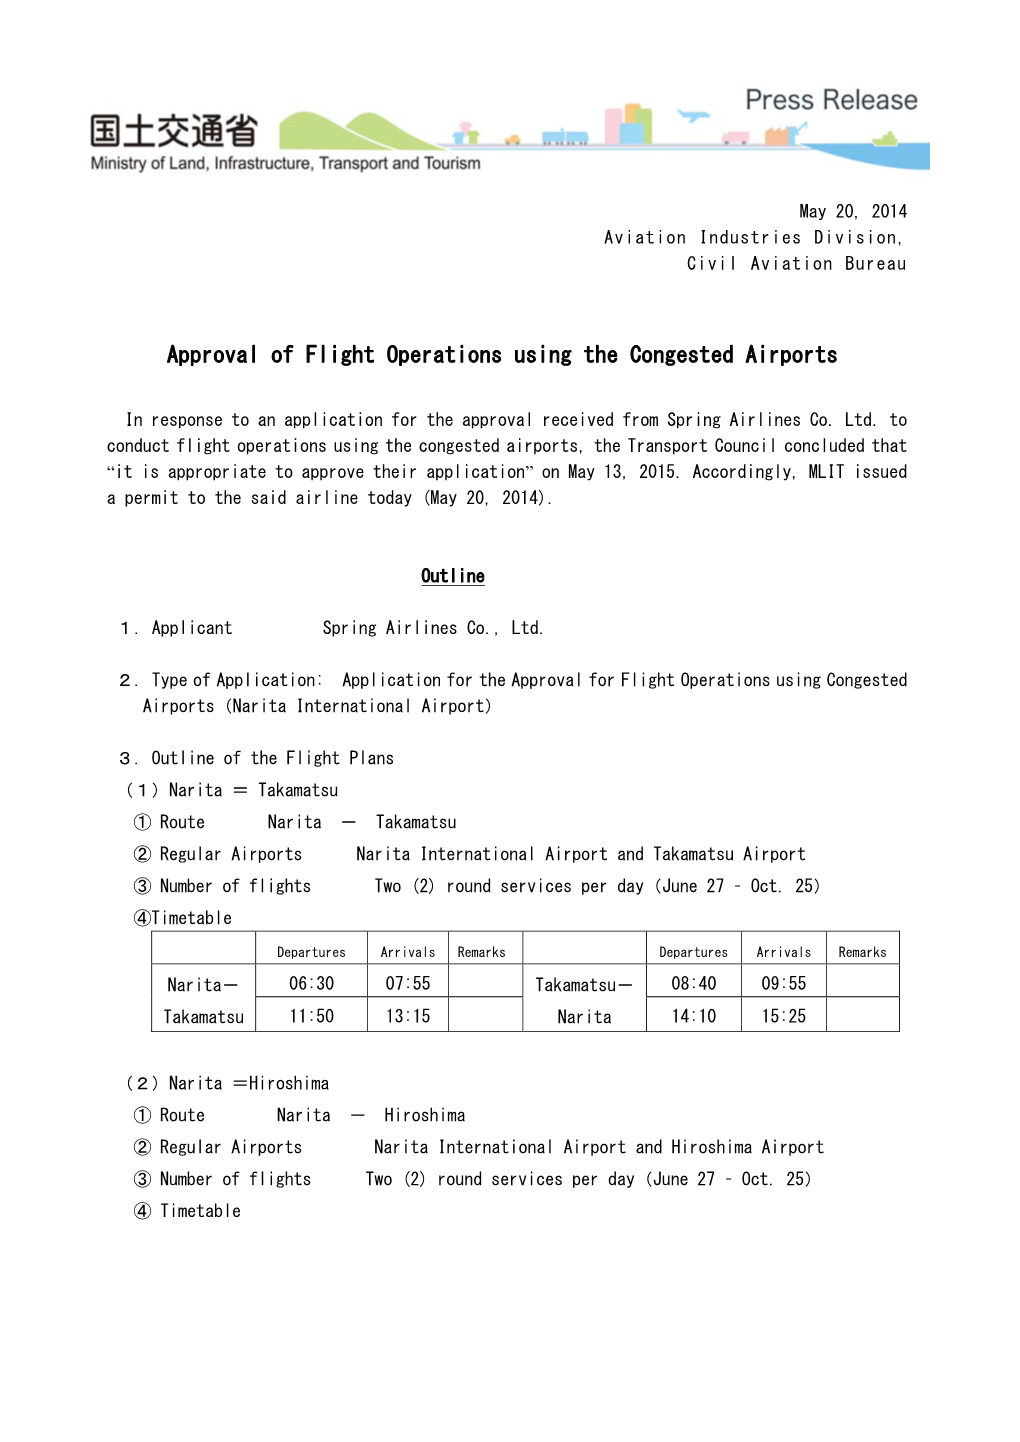 Approval of Flight Operations Using the Congested Airports